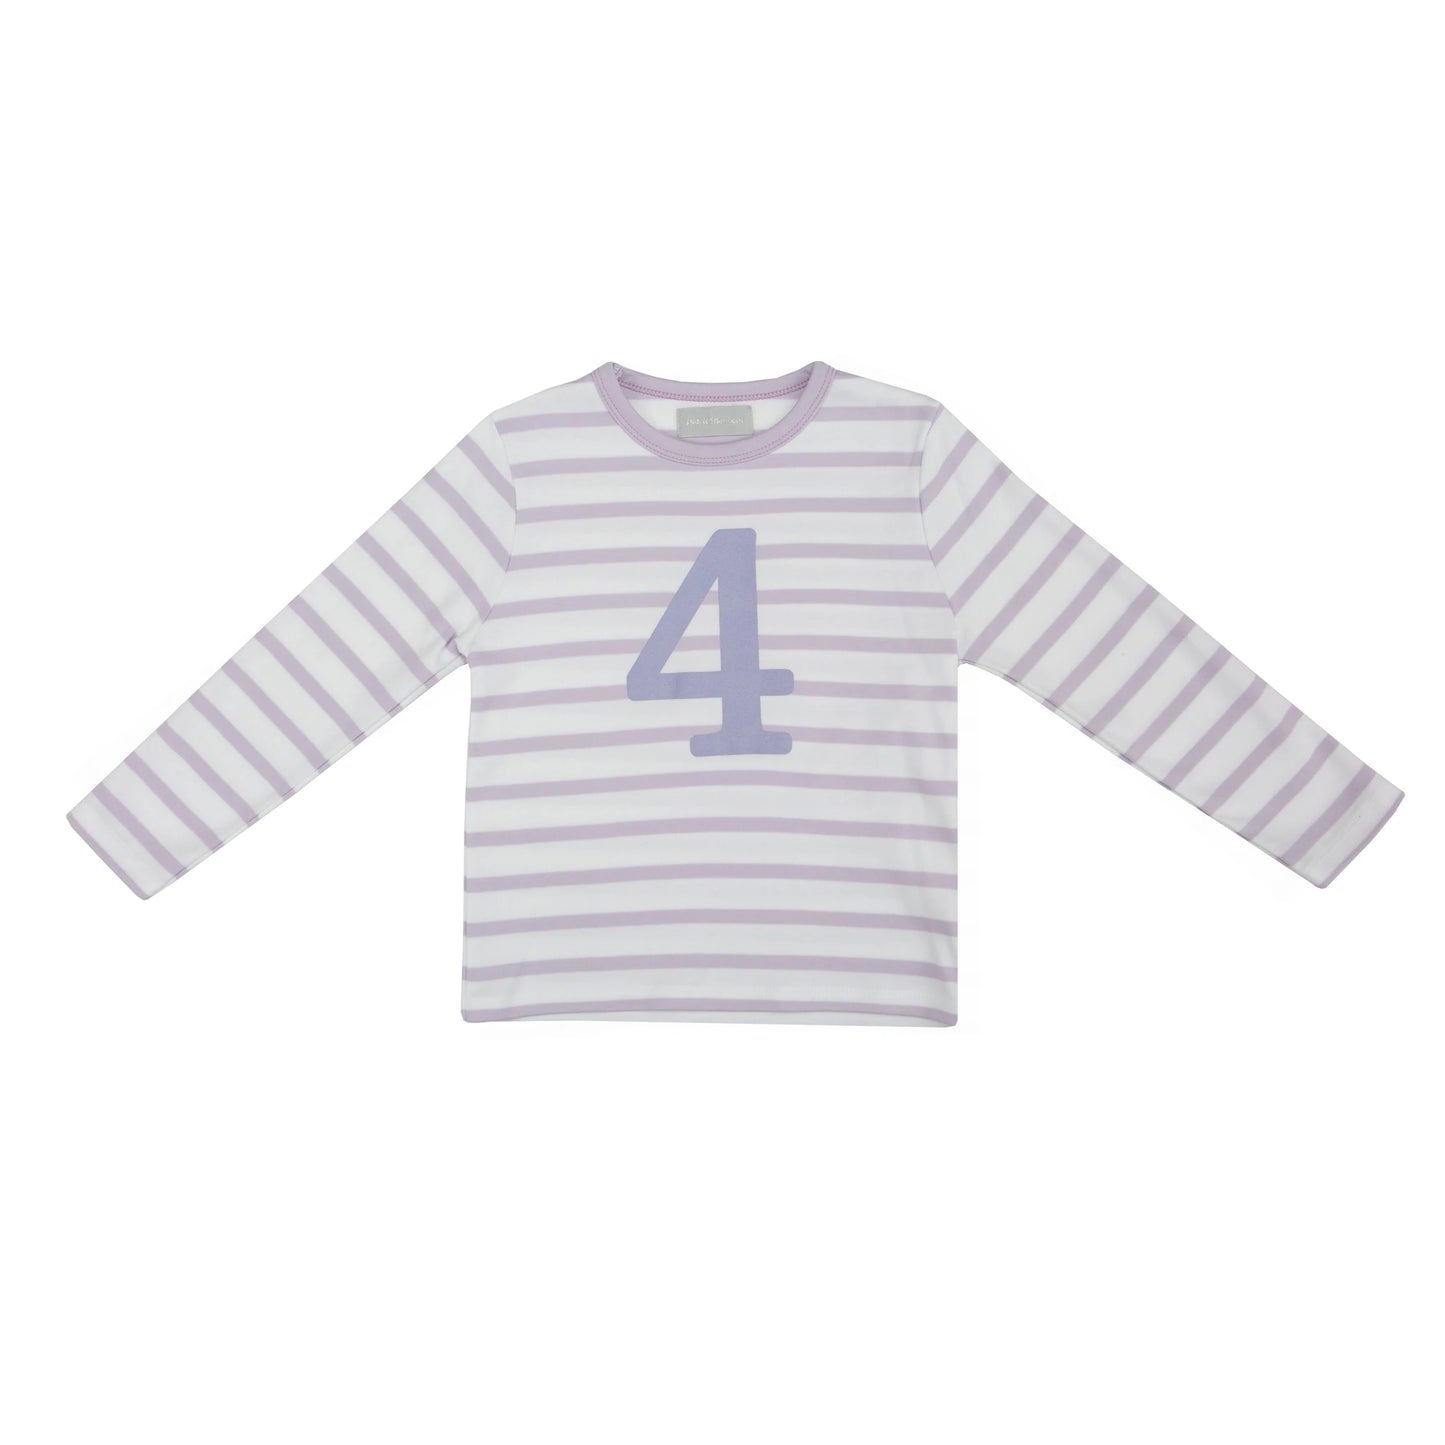 Age 4 Parma Violet and White Breton Striped Number T Shirt